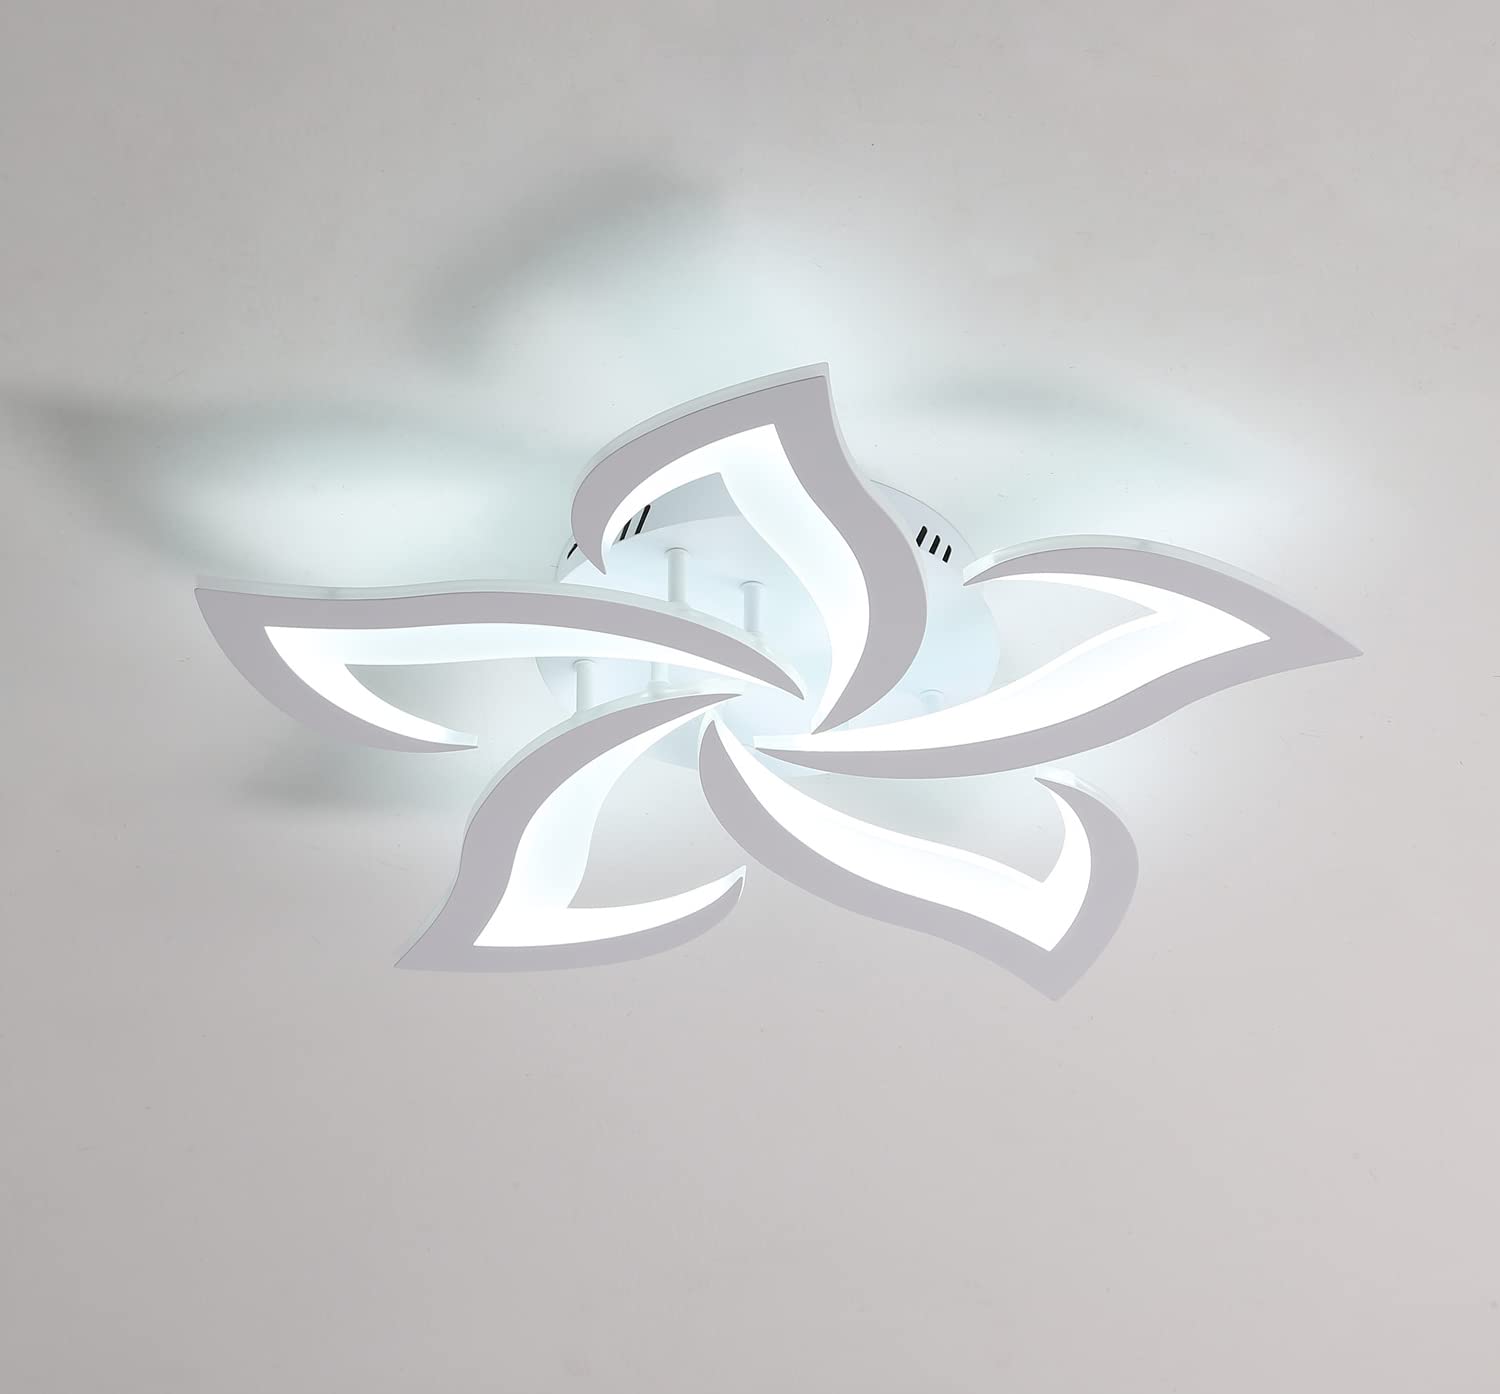 Comely Ceiling Lights Bedroom, LED Ceiling Lights 60W 6500LM, Cool White 6000K, Acrylic Petal Design Mordern Ceiling Lighting for Living Room Bedroom (Dia 60cm)